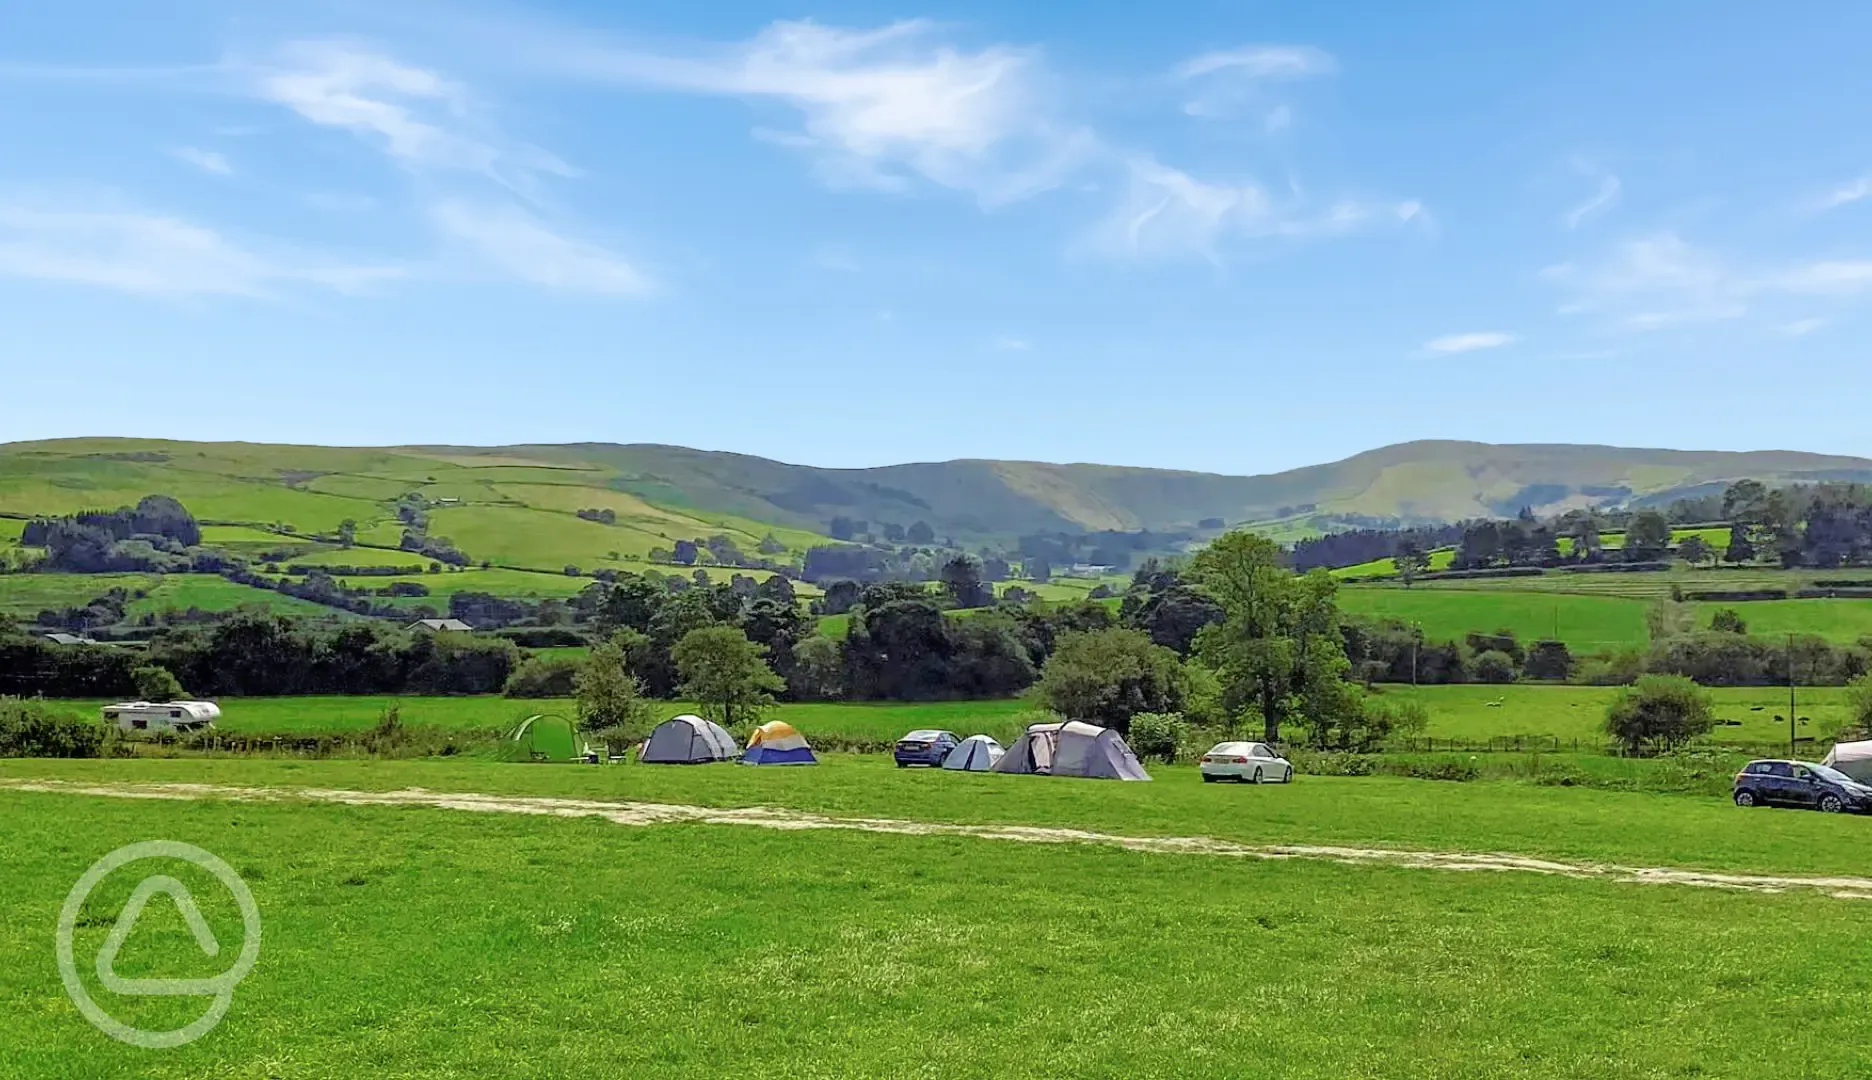 Camping pitches